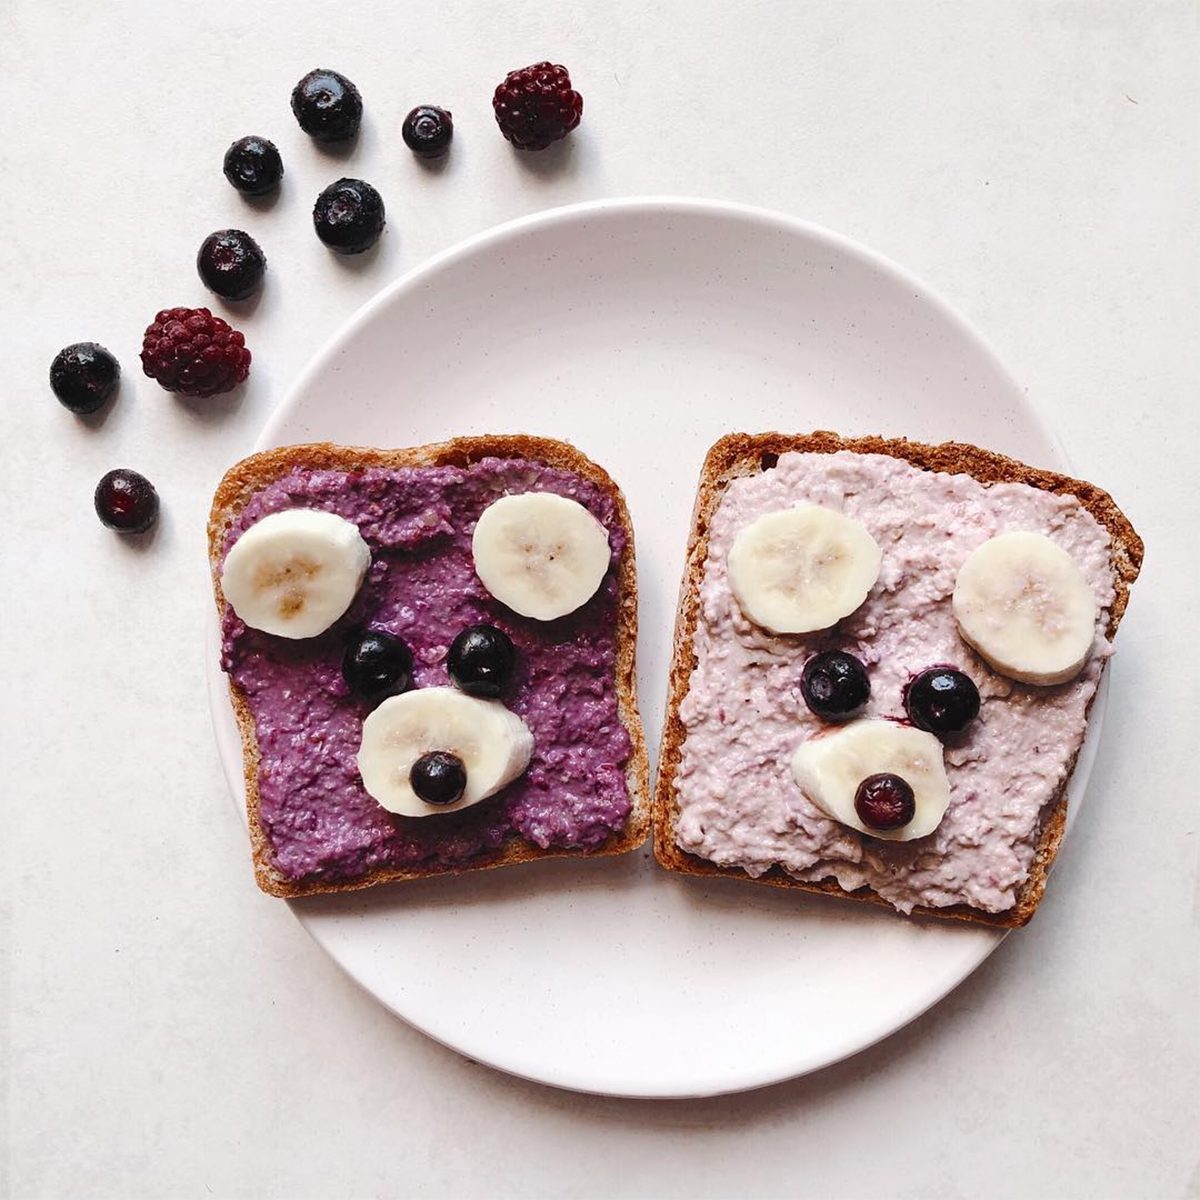 13 Animal-Shaped Foods That Kids Love to Eat